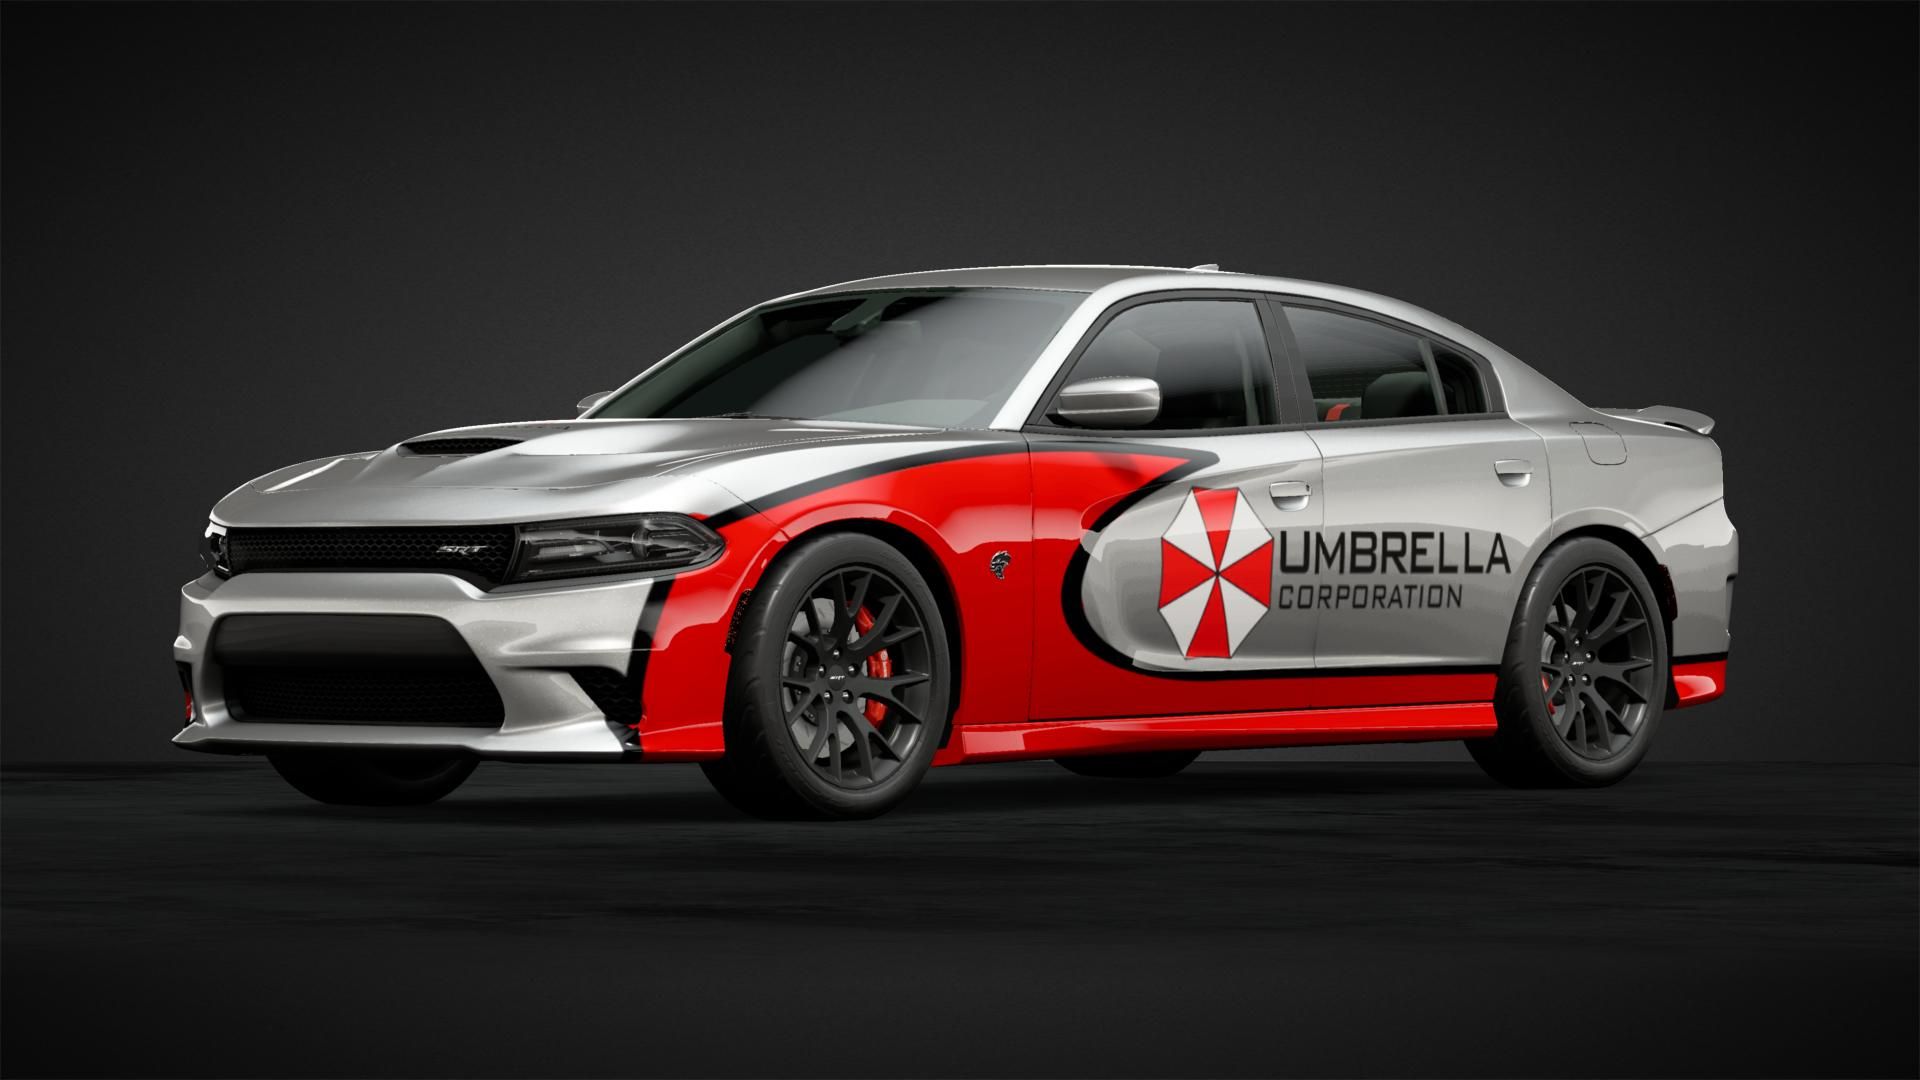 Umbrella Corp Charger Livery by JDM_Obsessed_19. Community. Gran Turismo Sport